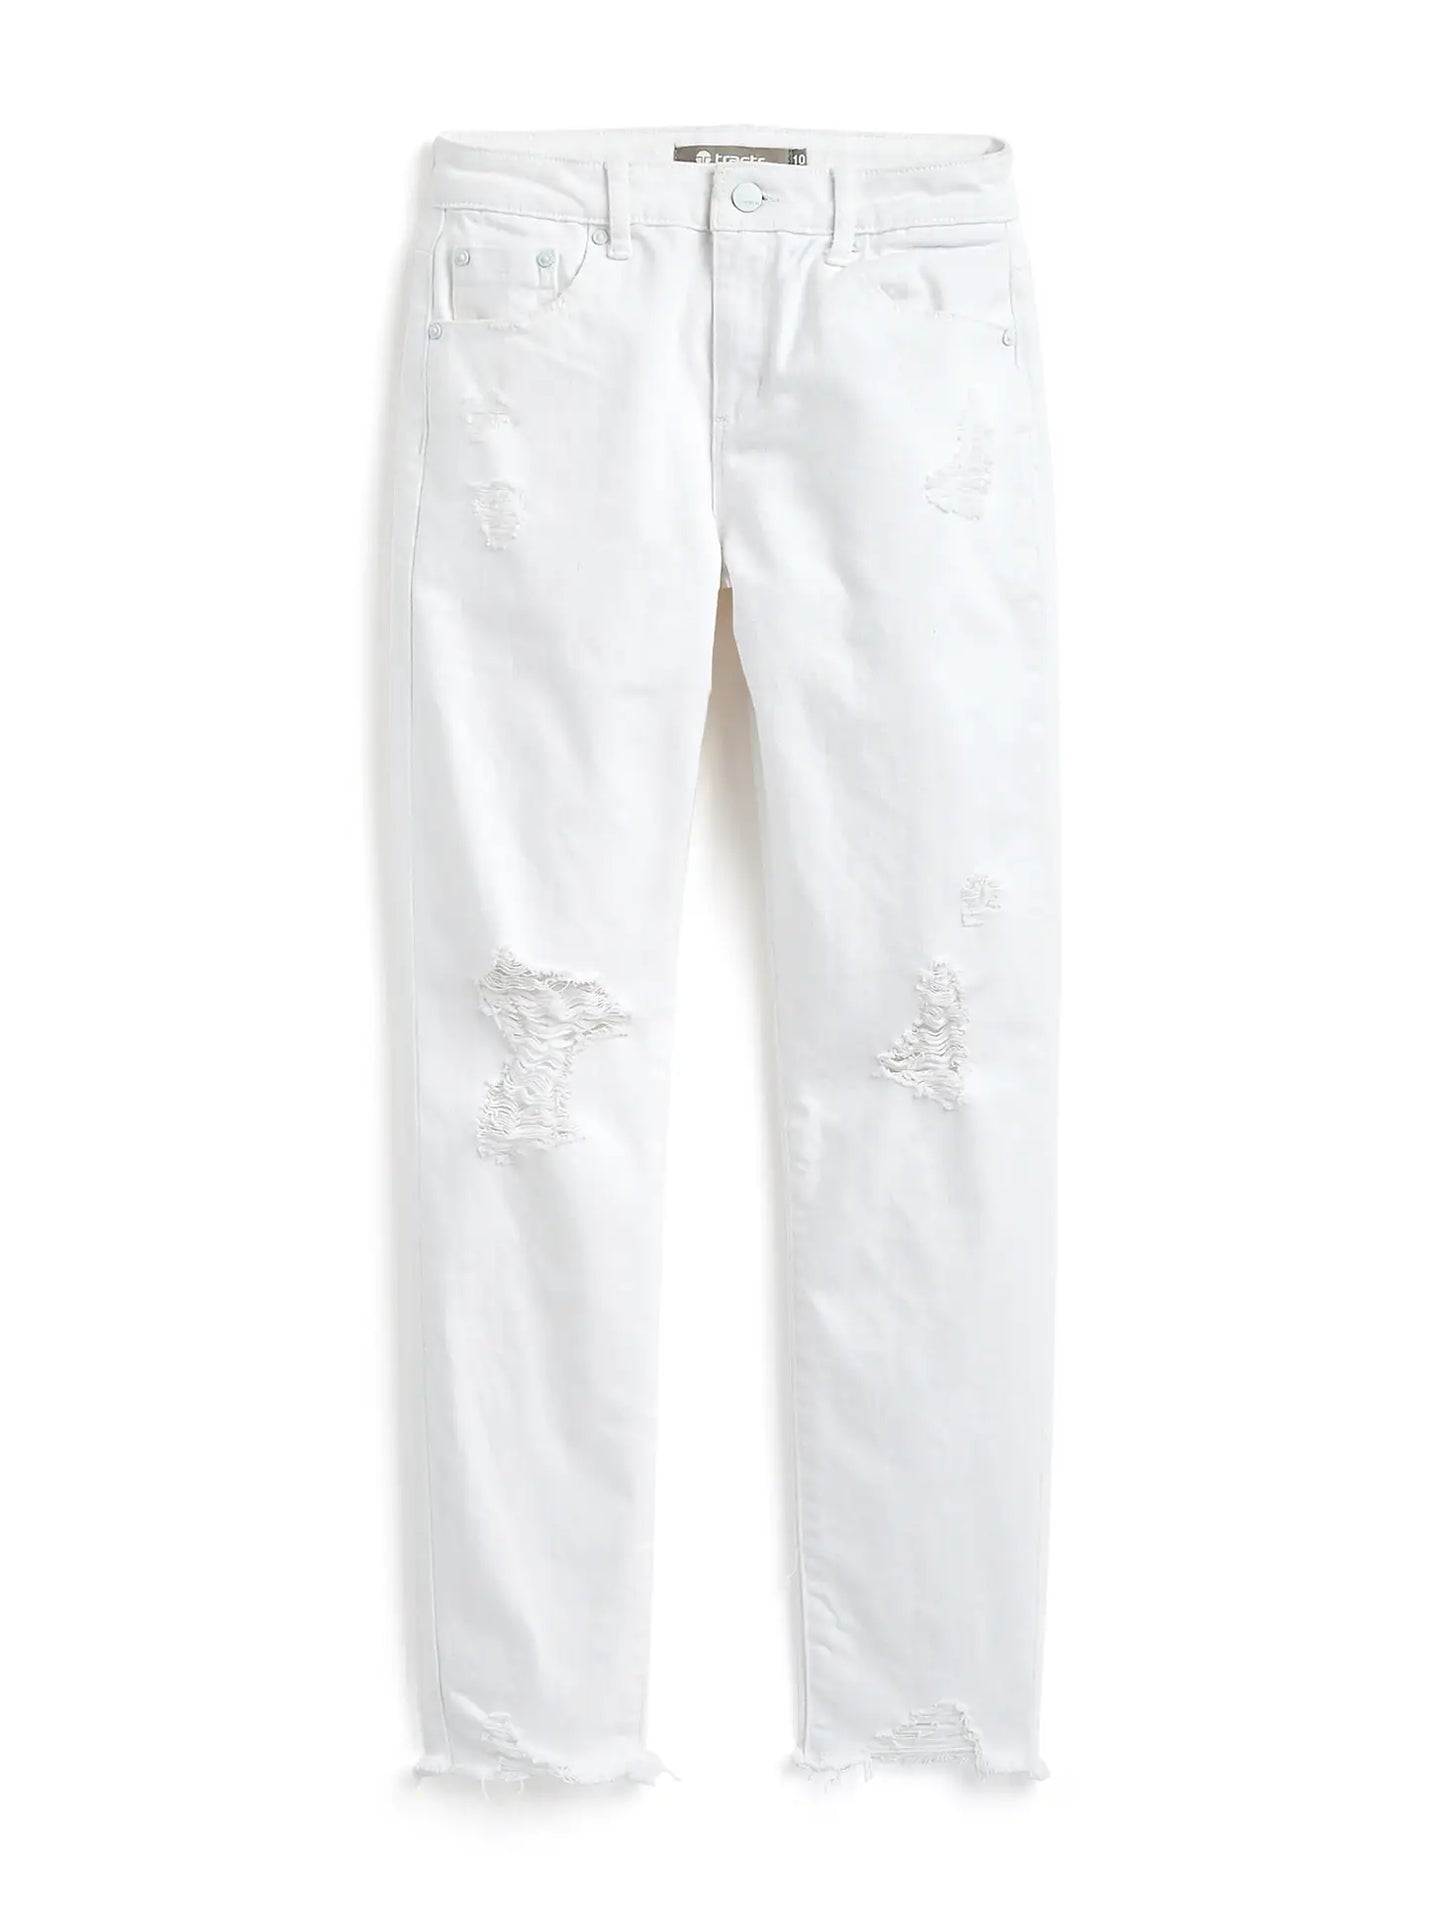 Tractr Jeans Girls-weekender Pants With Destruction